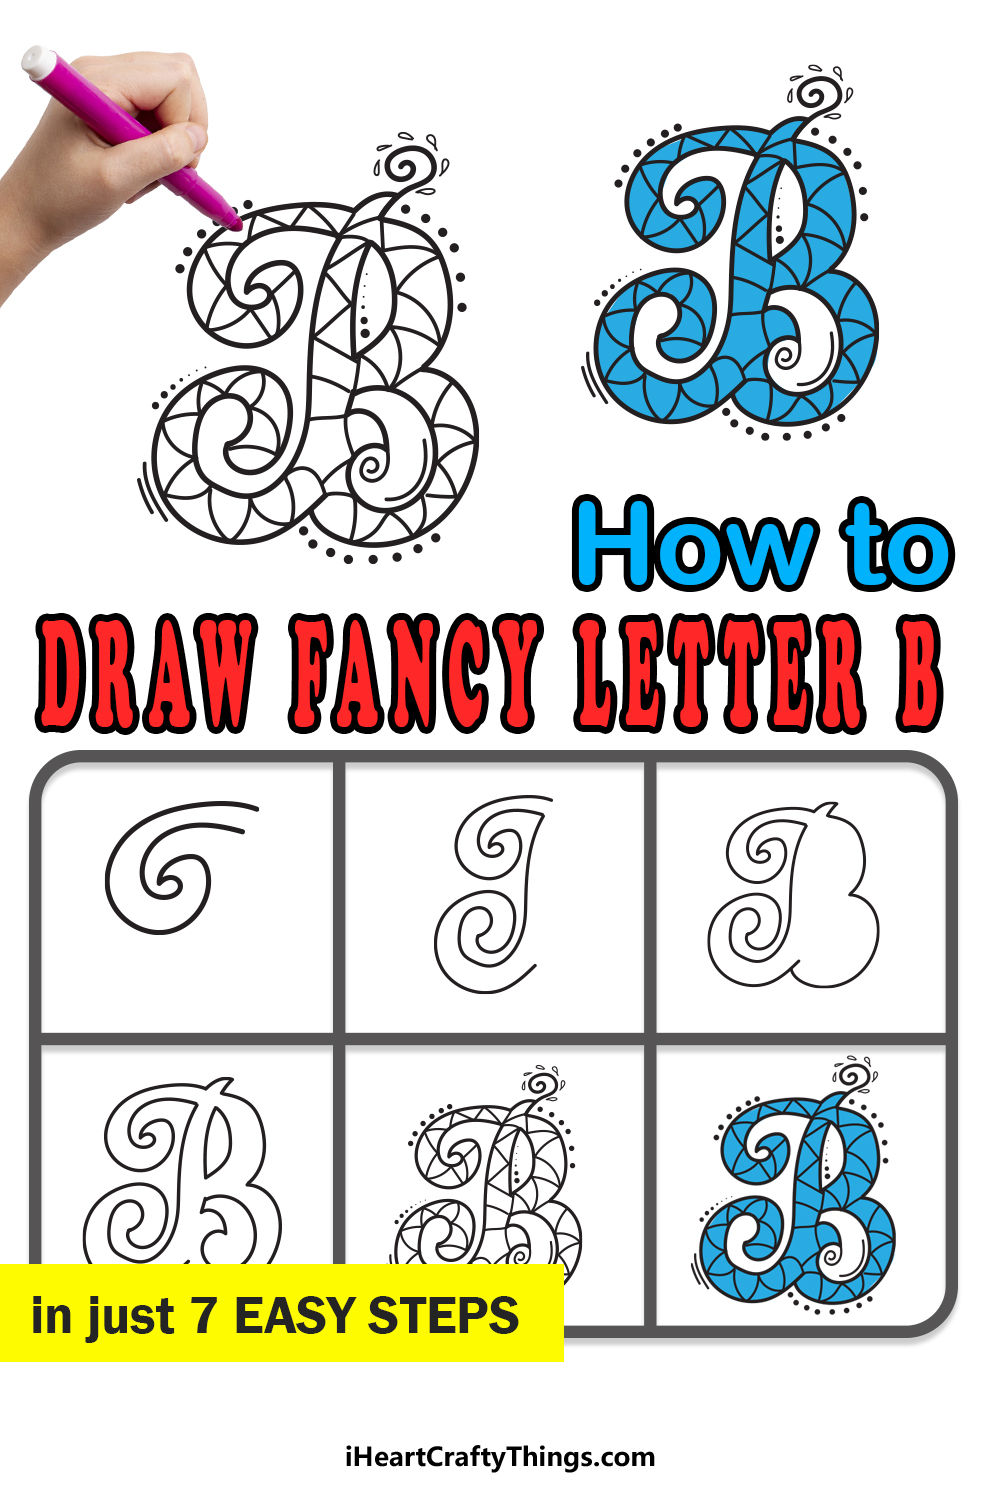 How To Draw Your Own Fancy B step by step guide